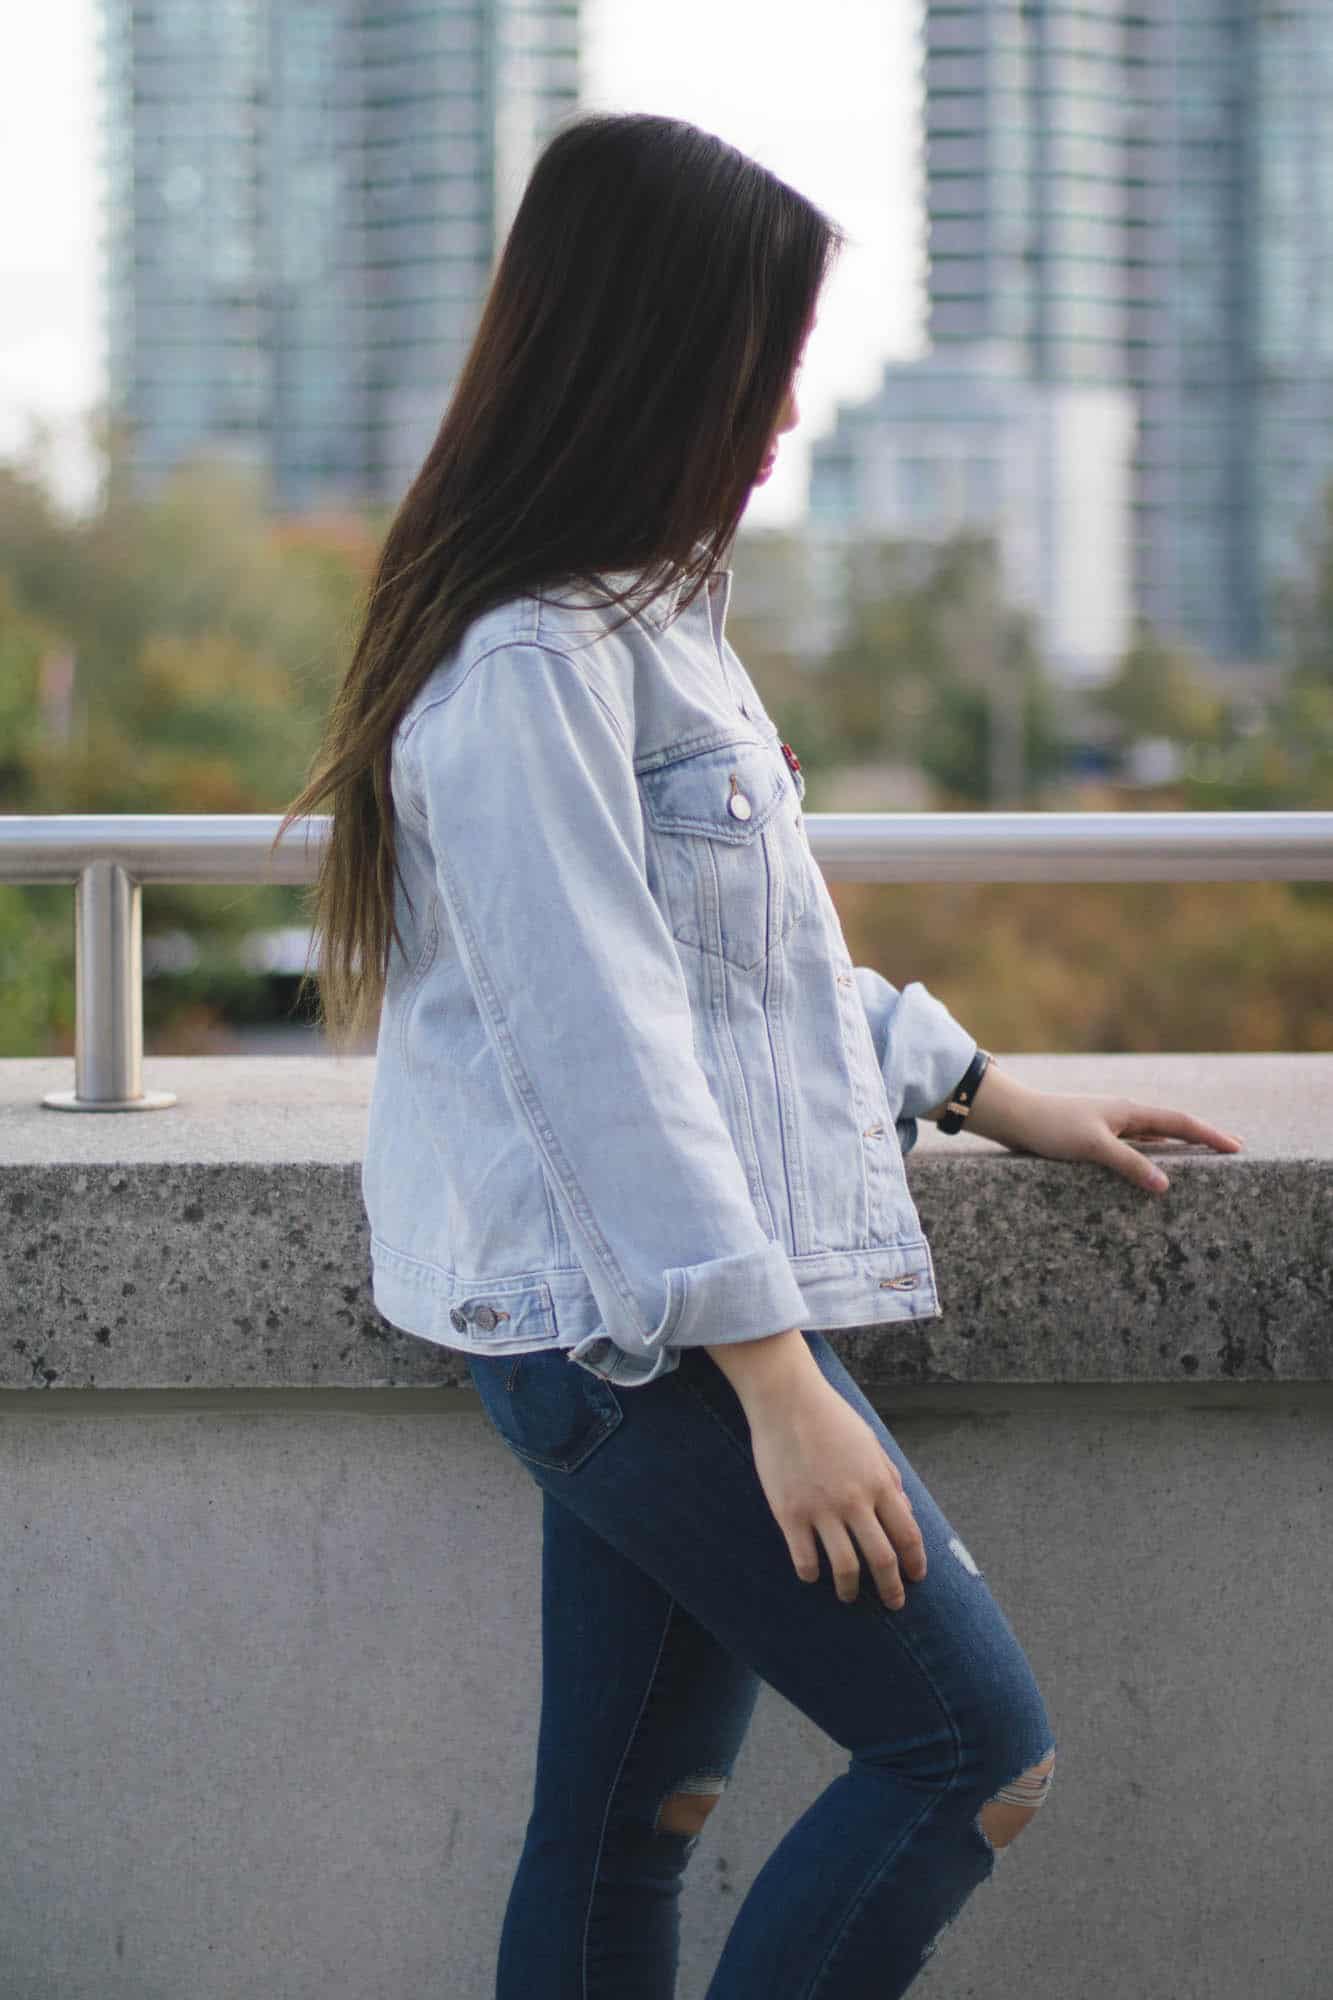 Tips on how to style denim on denim, also known as the Canadian tuxedo!